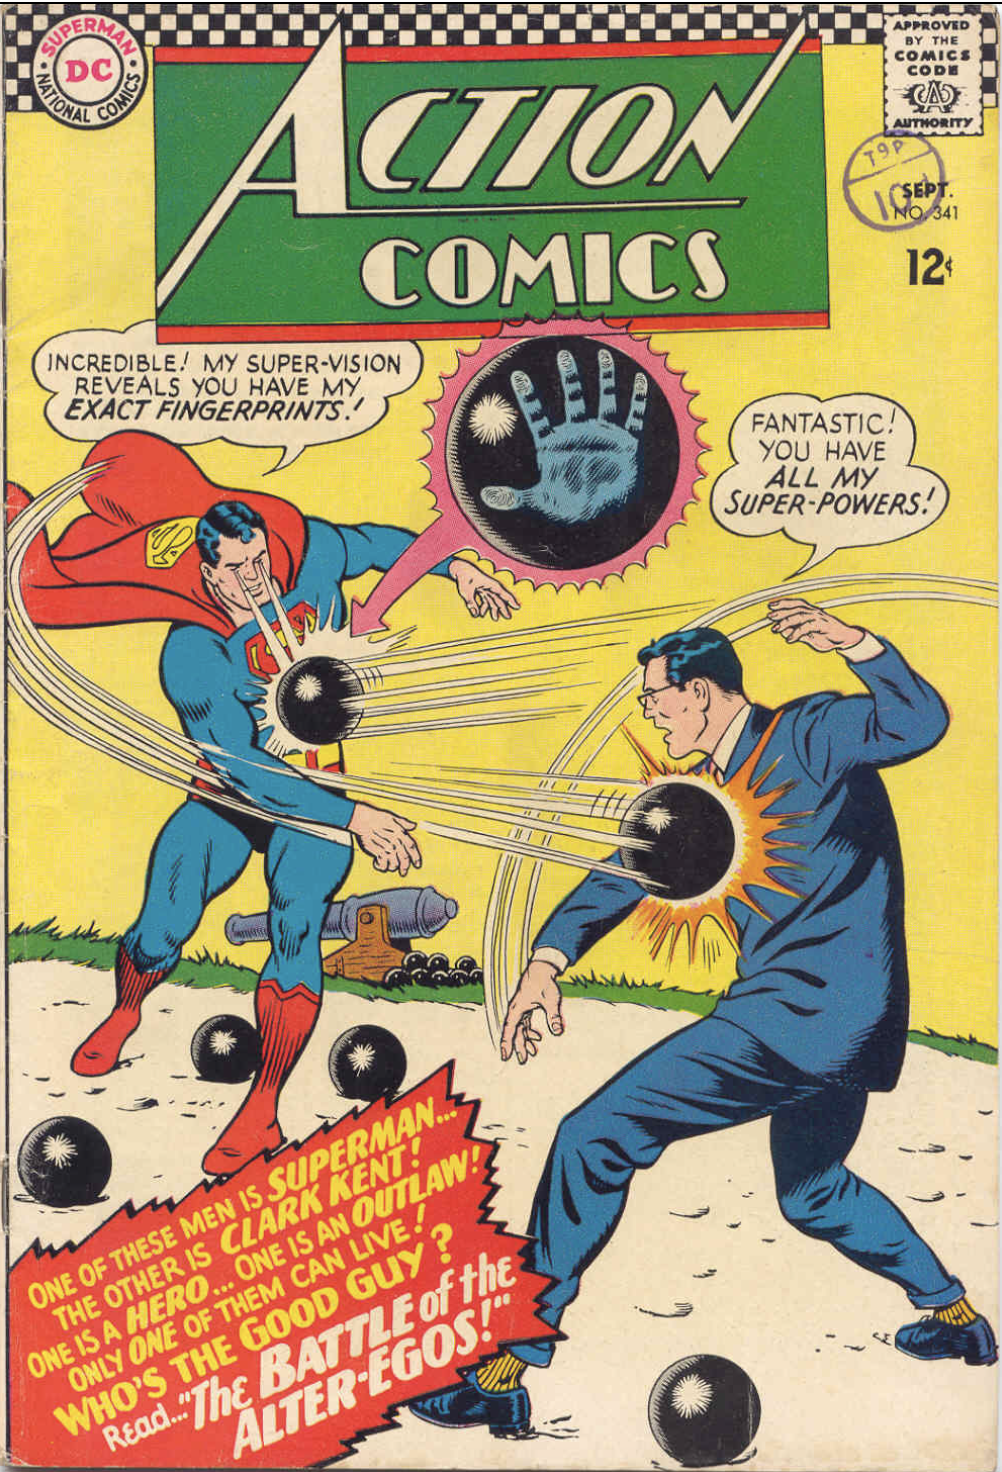 When I Think About You, I Punch Myself (Action Comics #341)